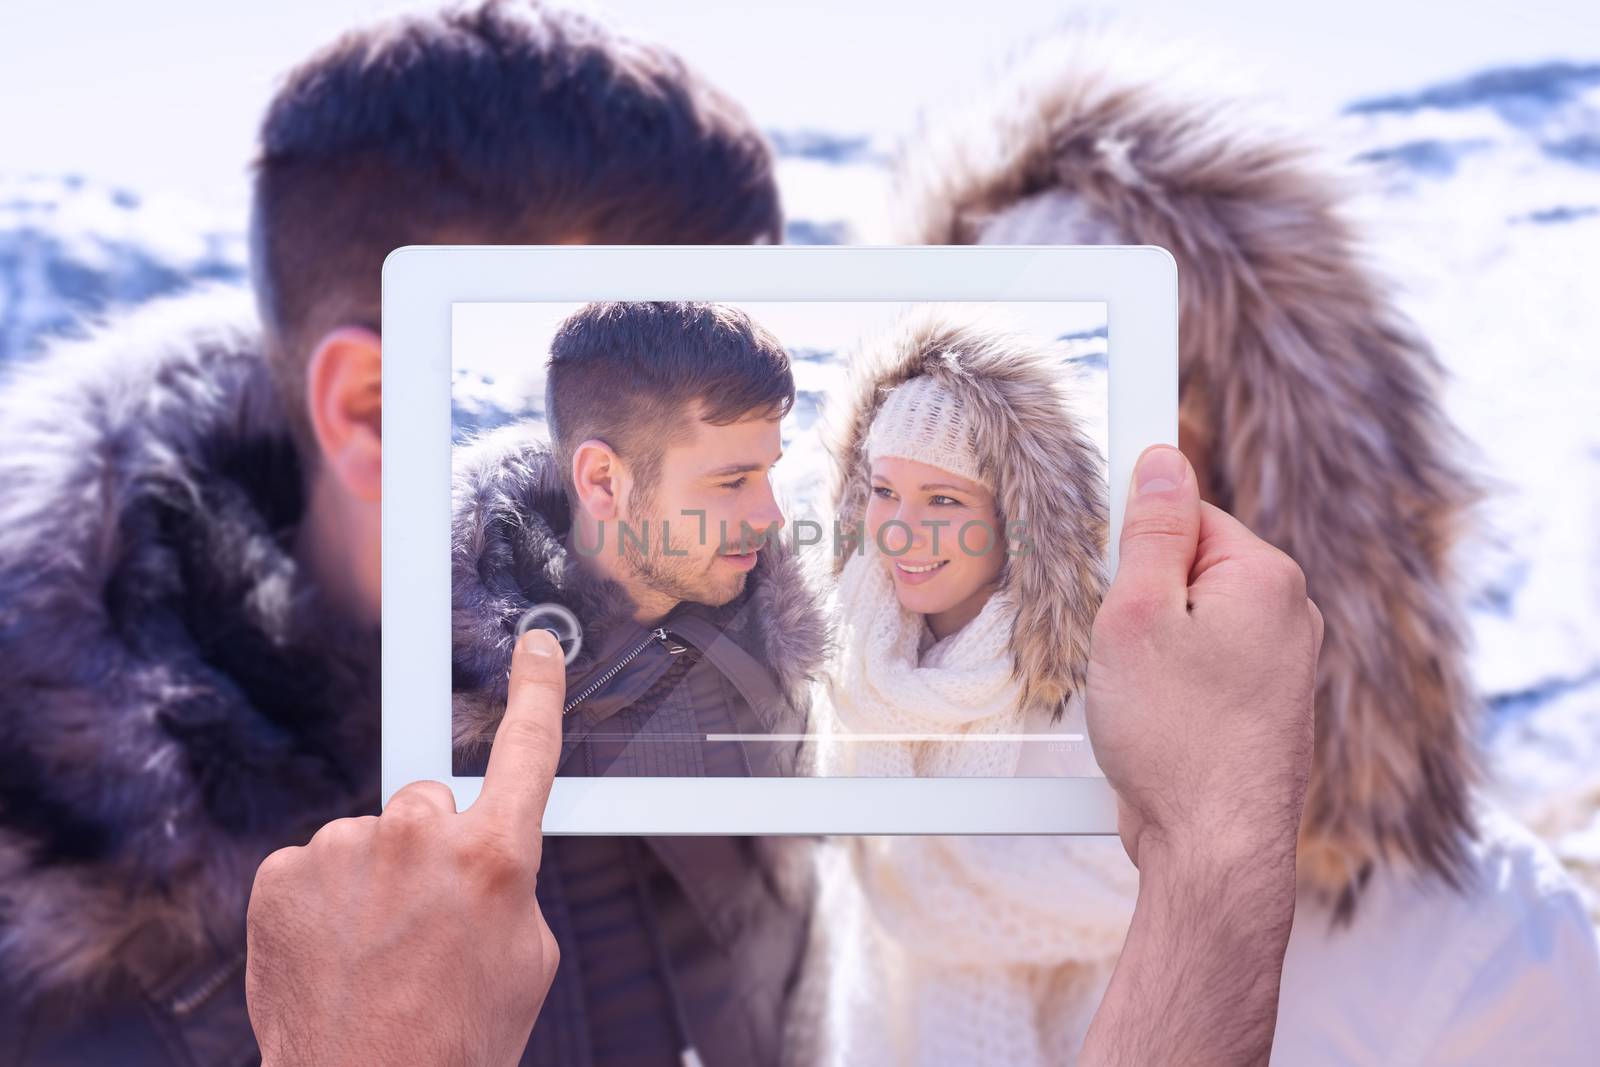 Hand holding tablet pc against couple in fur hood jackets against snowed mountain